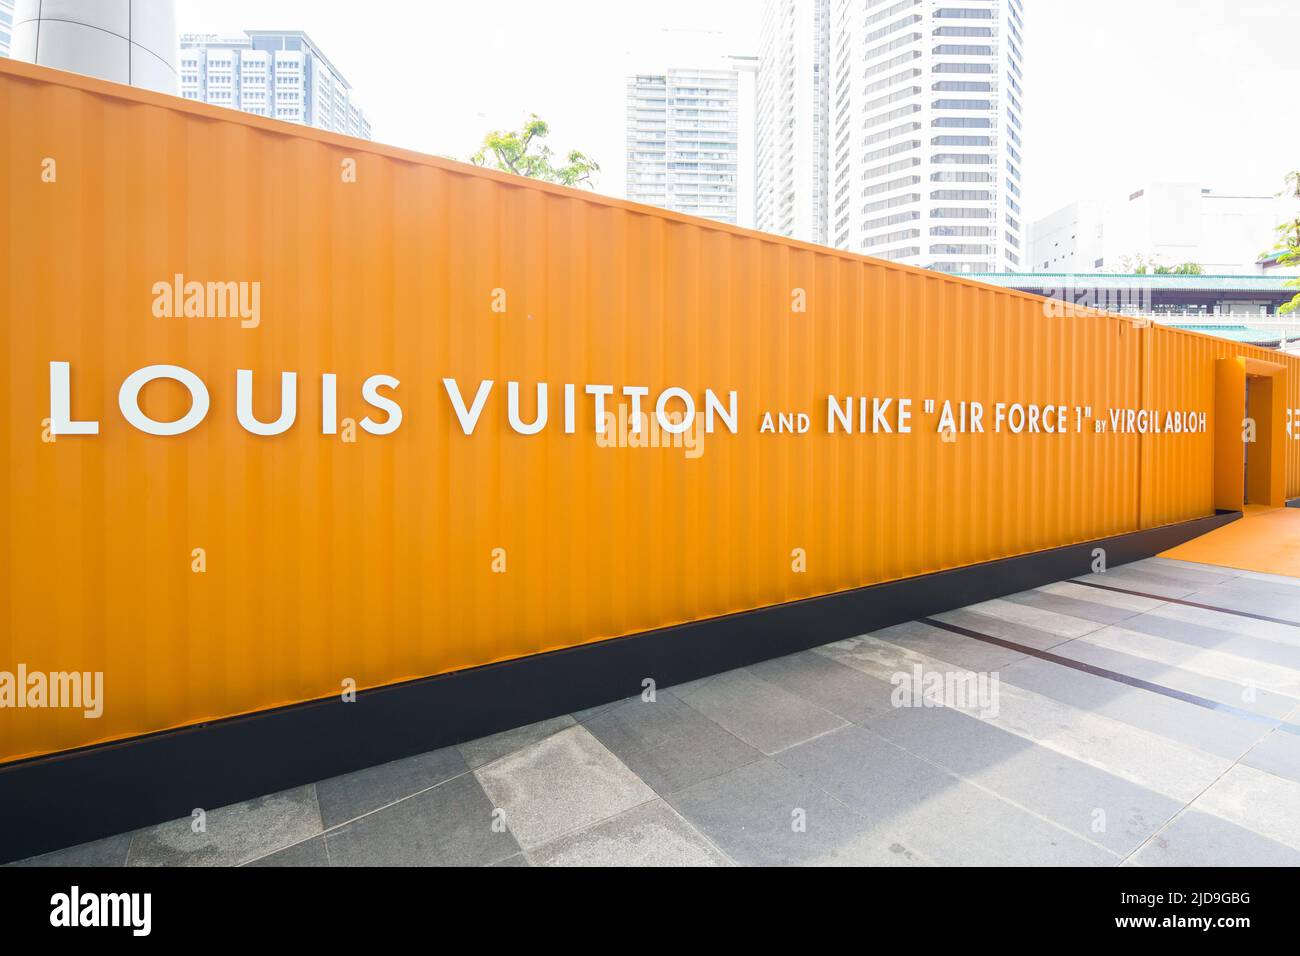 Louis Vuitton x Nike Air Force 1 Exhibition by Virgil Abloh digital exhibition in Singapore. 2022. Stock Photo